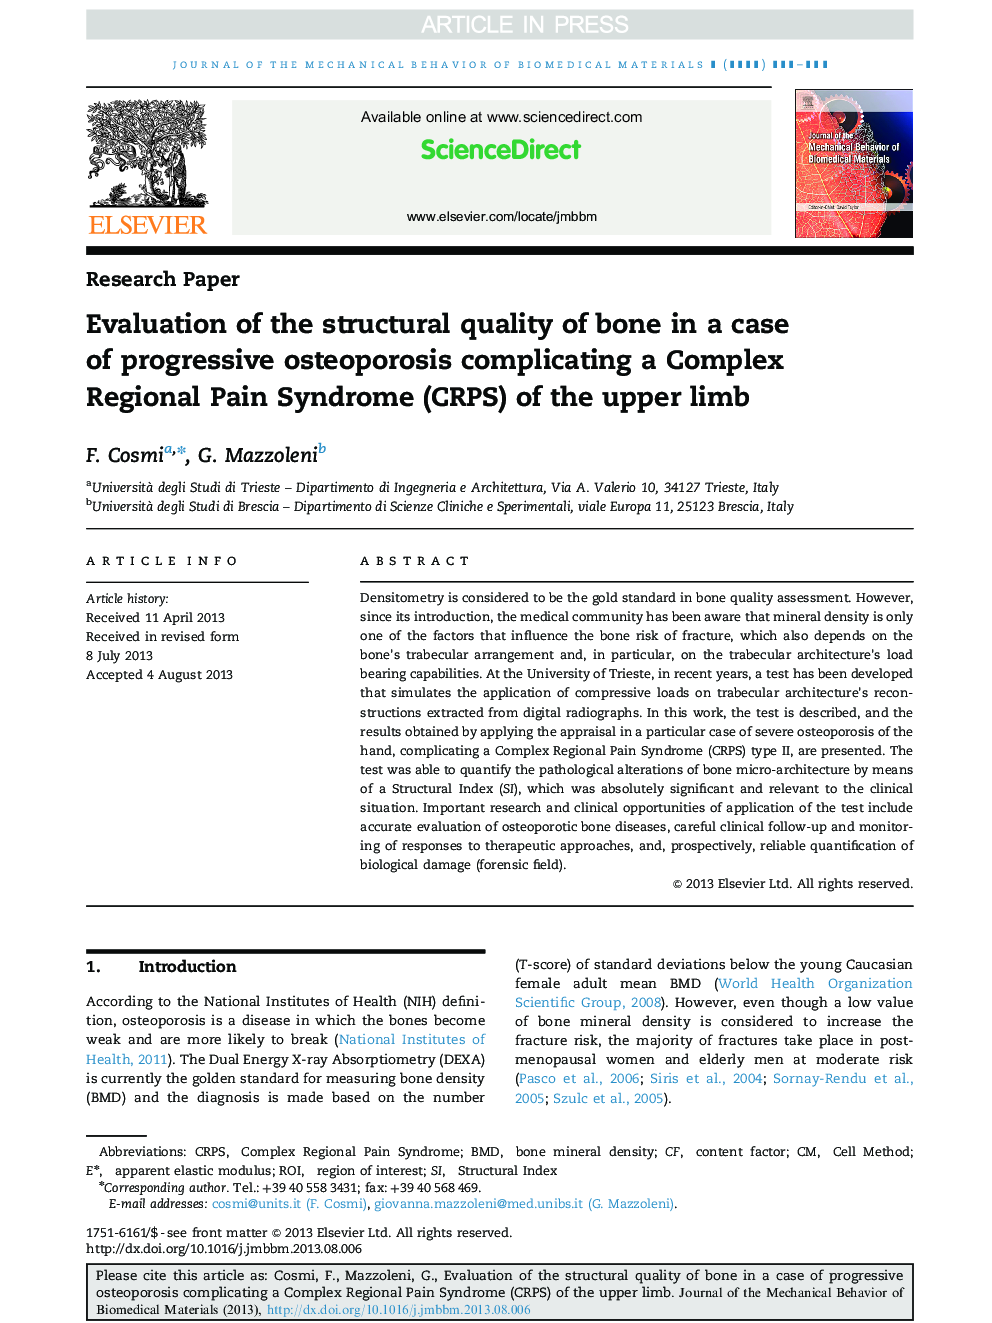 Evaluation of the structural quality of bone in a case of progressive osteoporosis complicating a Complex Regional Pain Syndrome (CRPS) of the upper limb